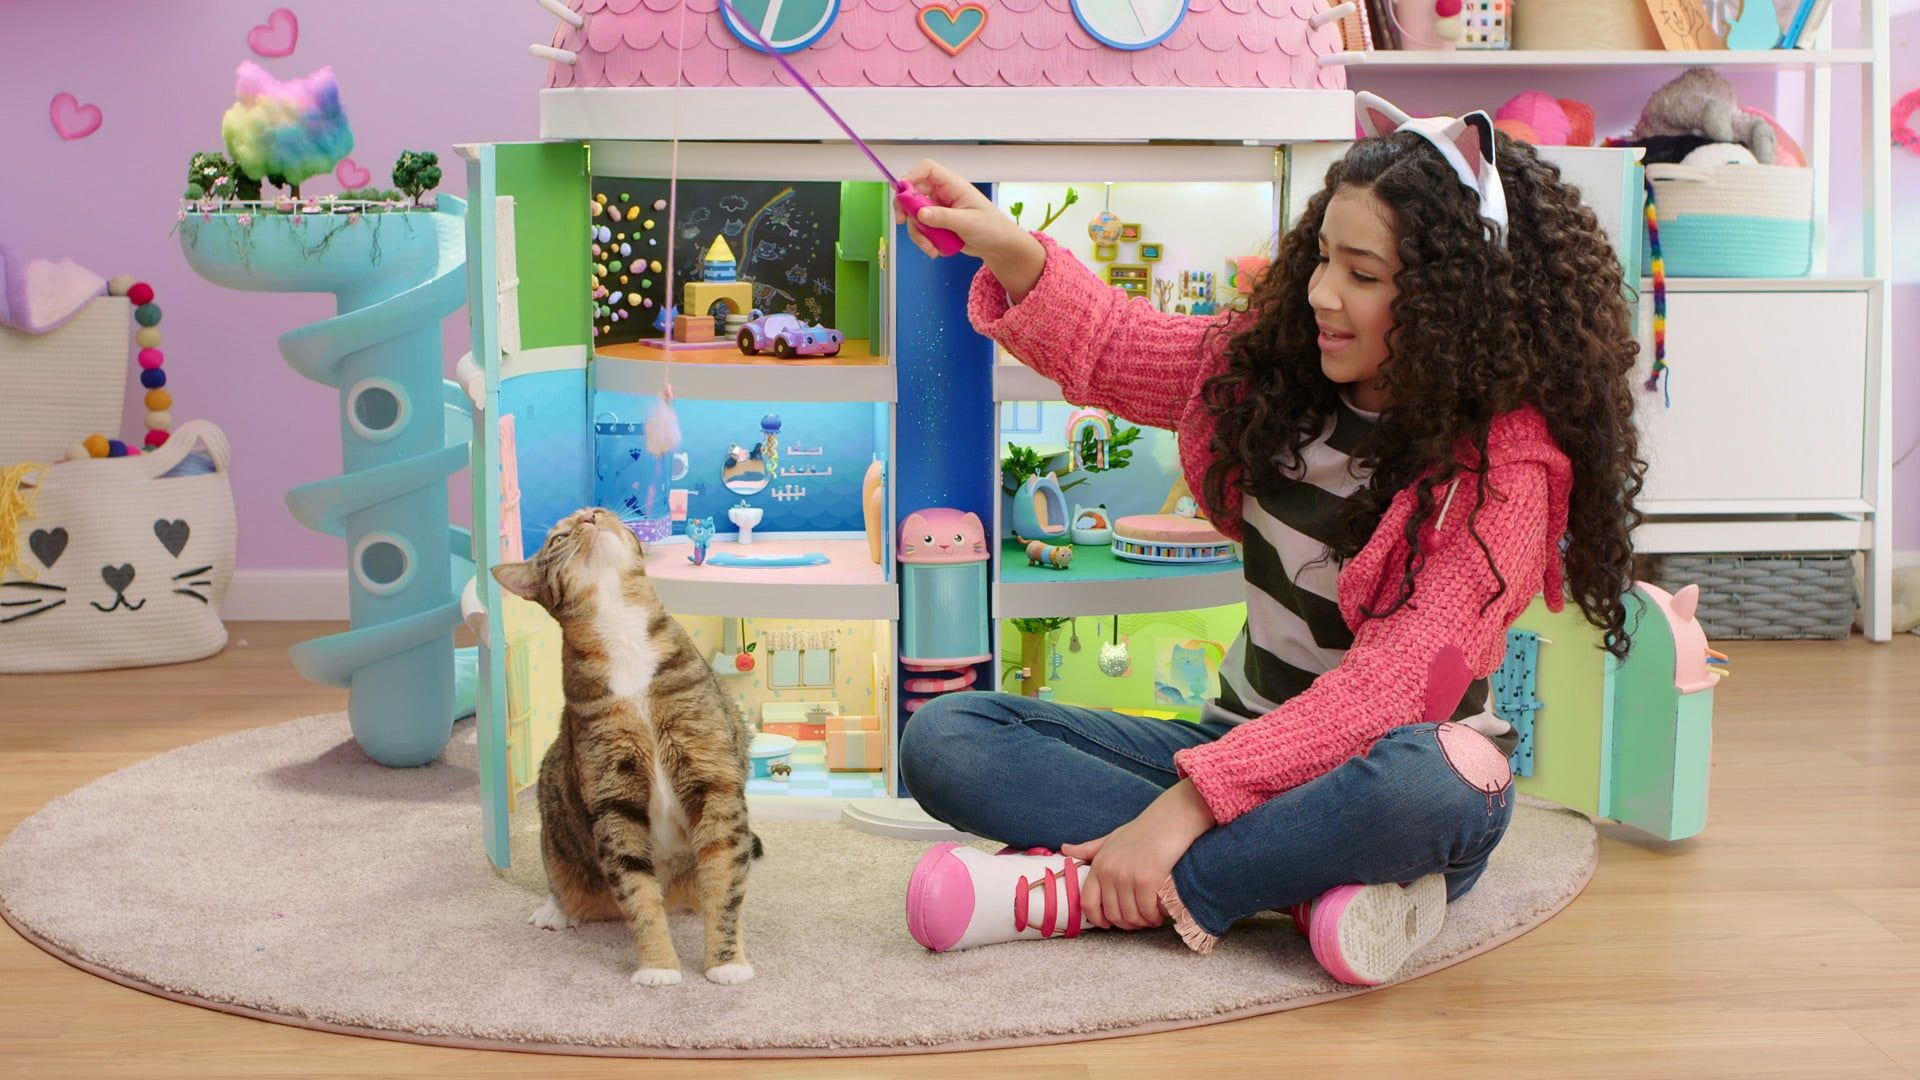 Photos From Season 1 of Netflix's Gabby's Dollhouse. See the For Netflix's New Kid Show About a Magical Dollhouse Filled With Cute Cats. POPSUGAR Family Photo 2